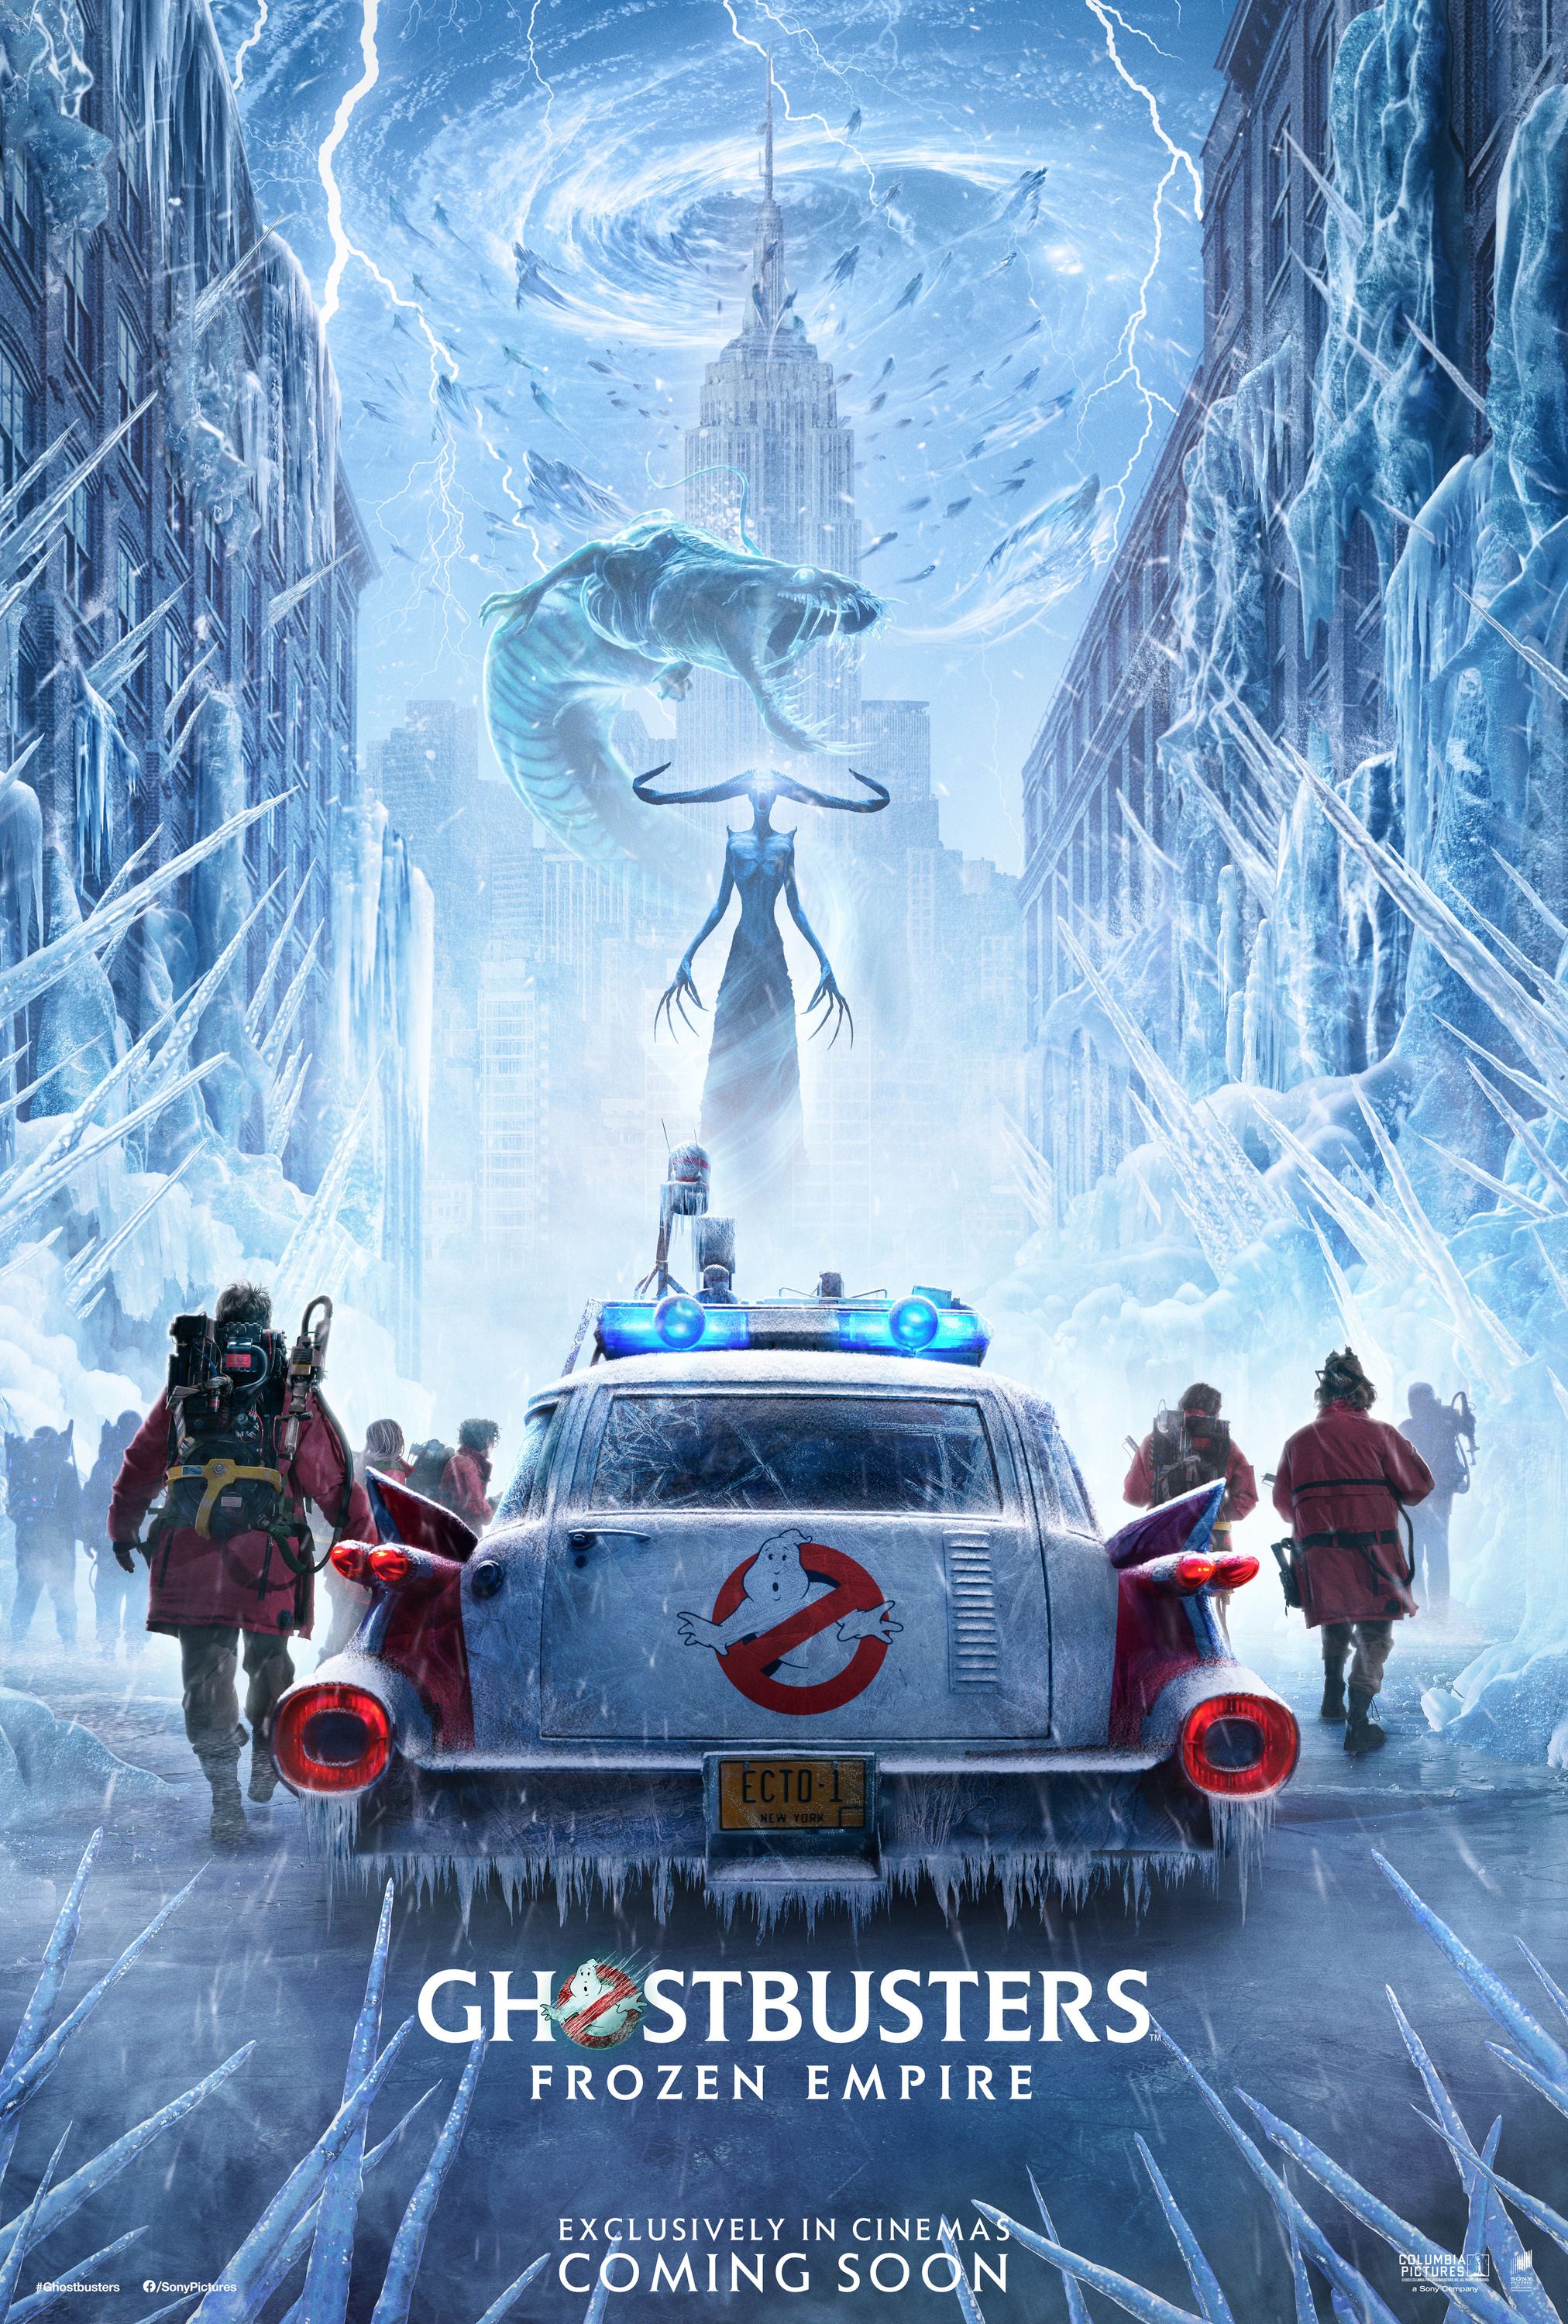 Ghostbusters Frozen Empire Sets Franchise Record With Rotten Tomatoes